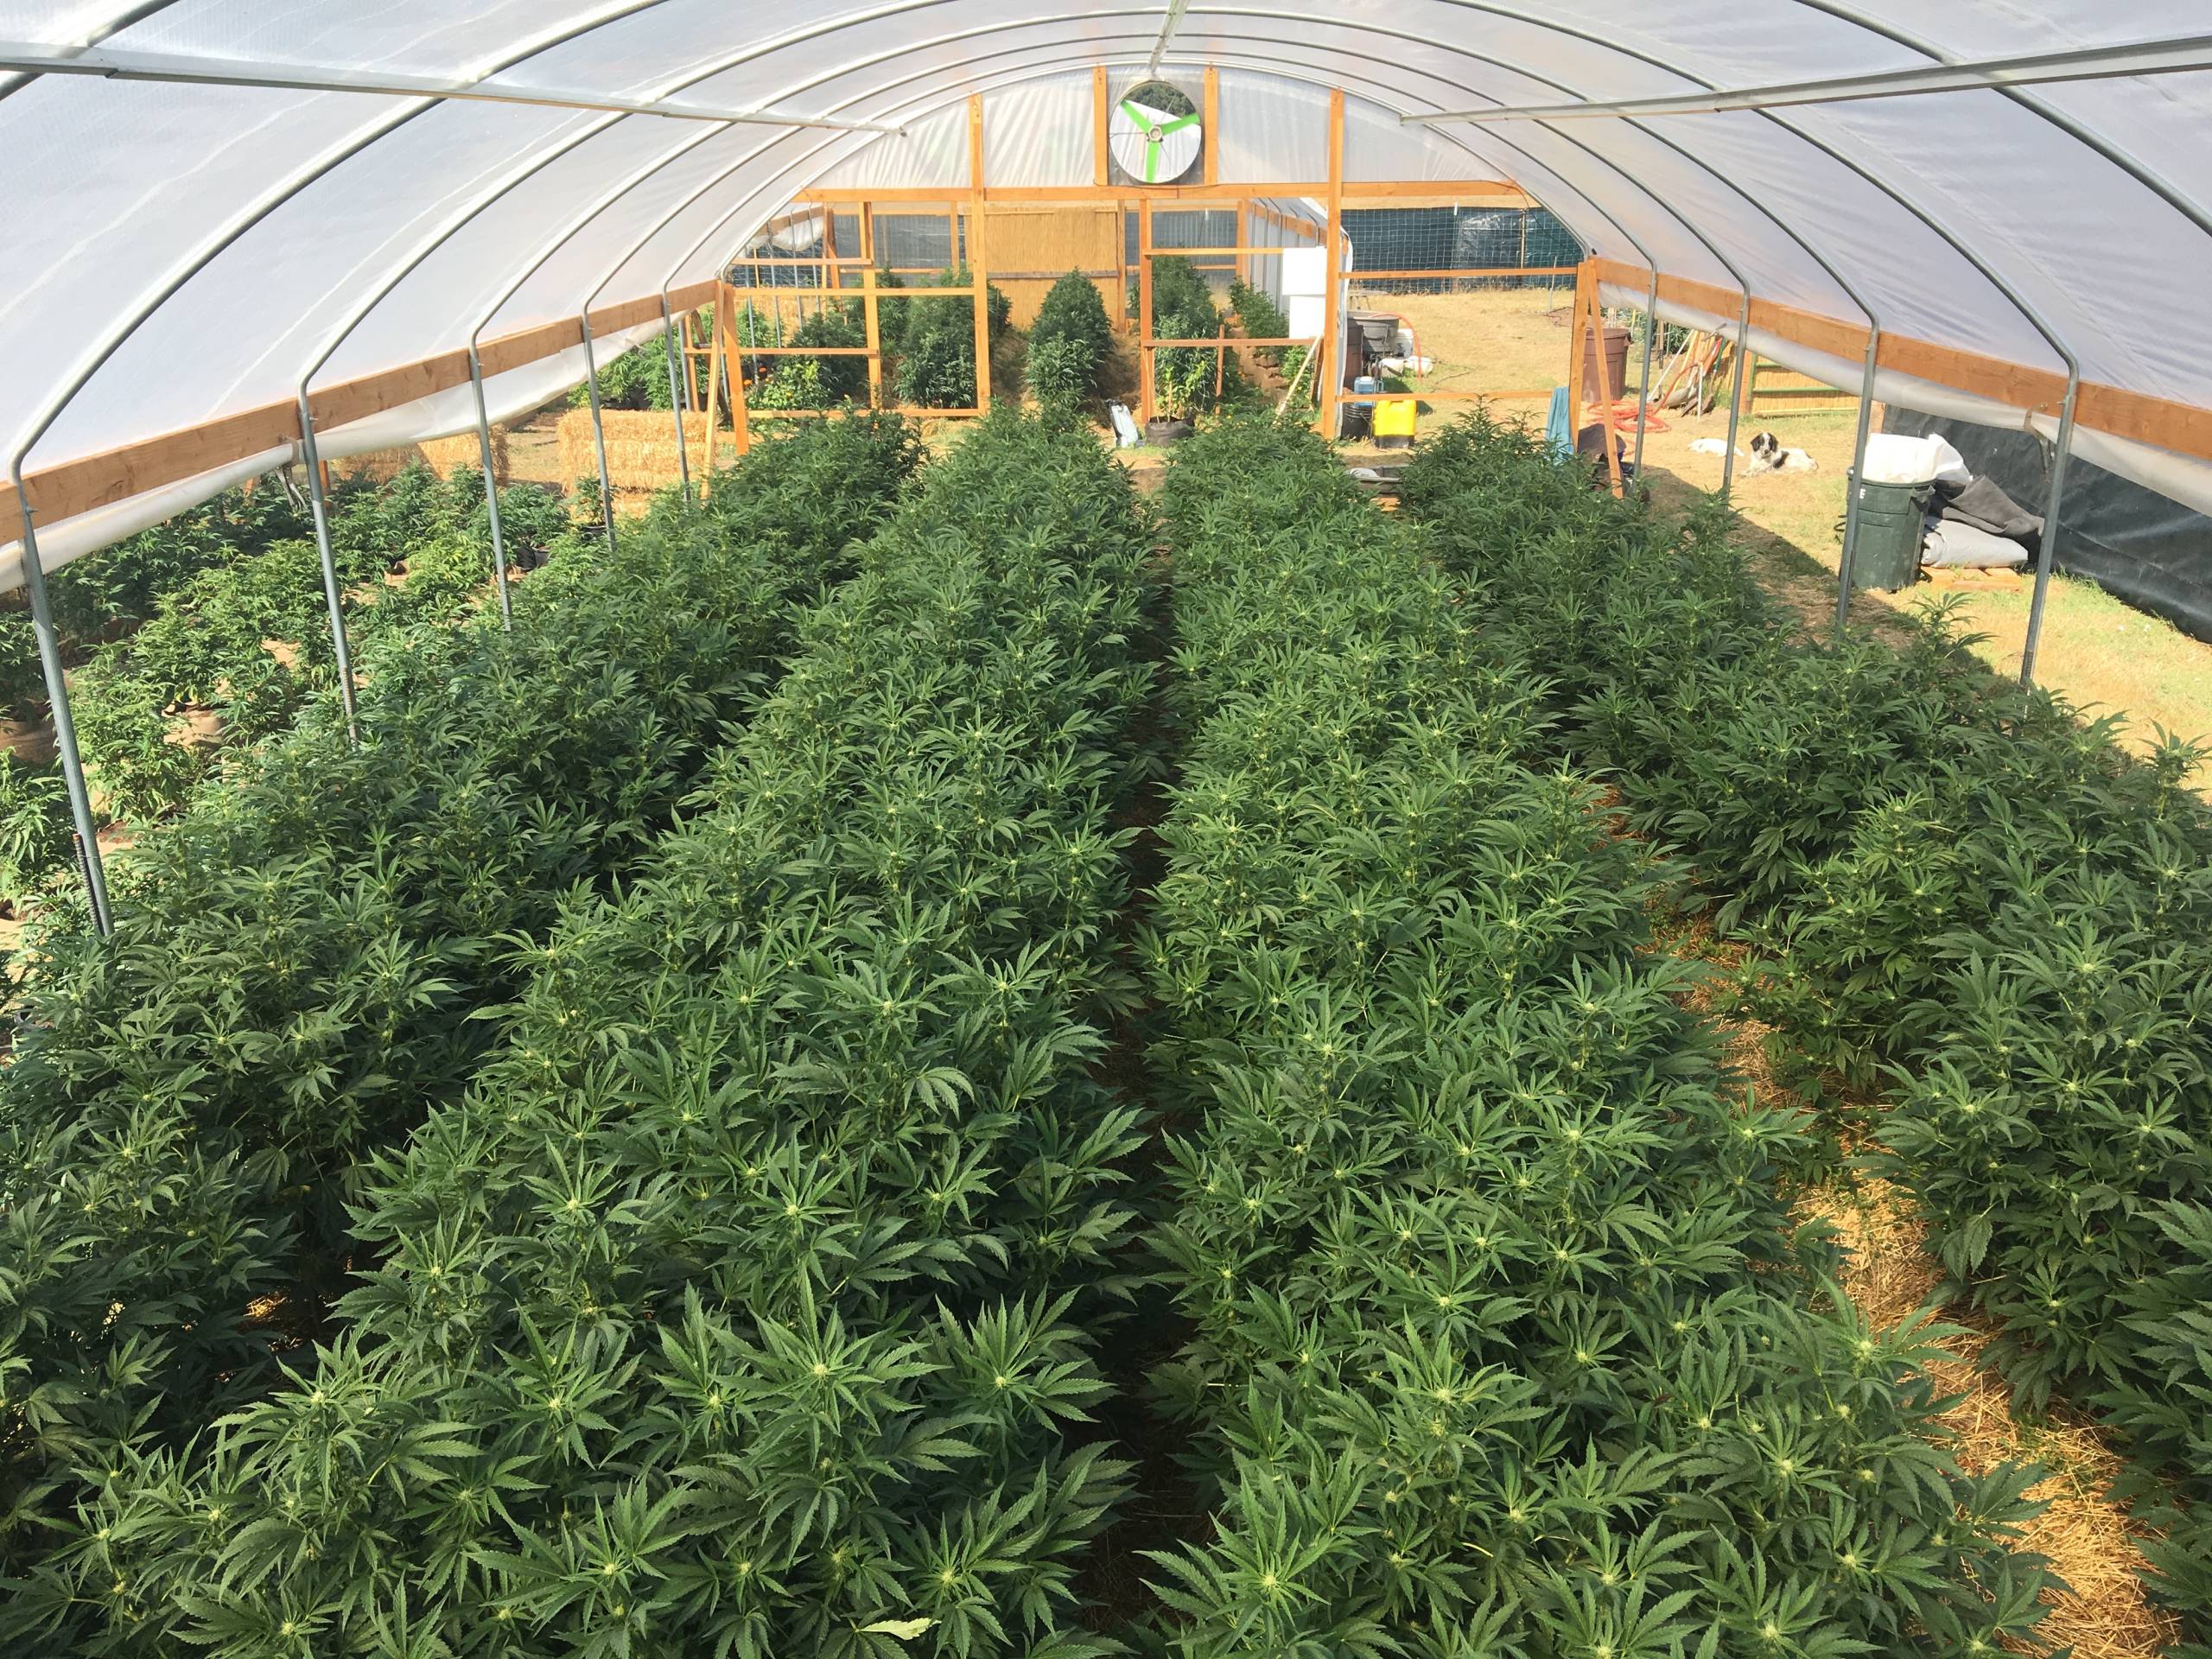 Rows of bright green cannabis plants inside a greenhouse during the daytime.